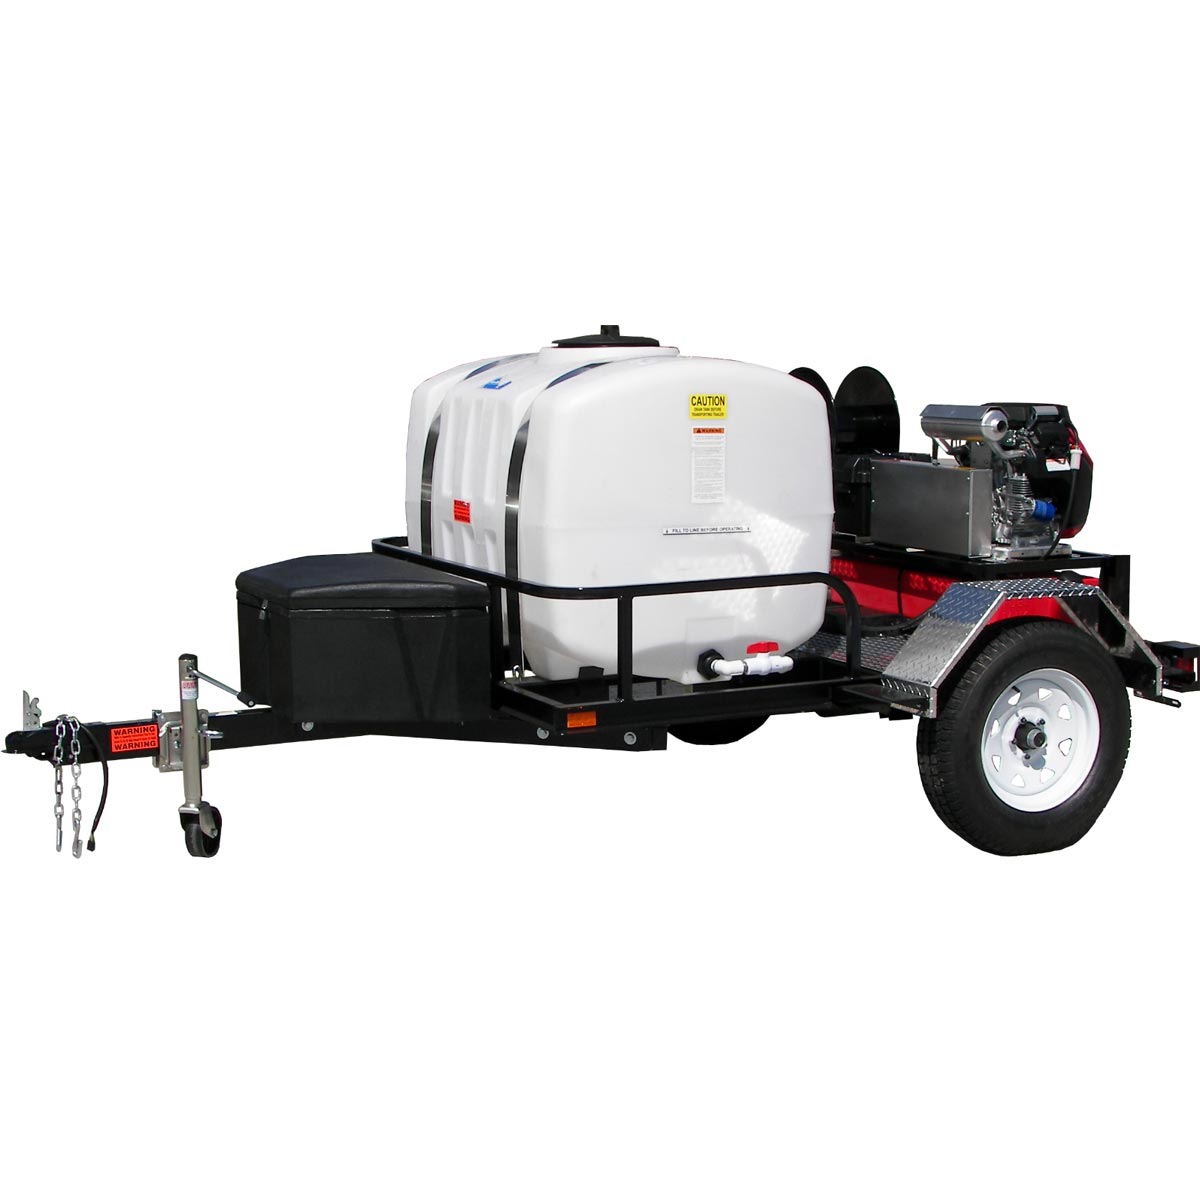 TRHDCV5550HG Pressure Pro GP Pressure Washer Tow-Pro Trailer Outfit 5000 PSI  5.5 GPM Freight Included